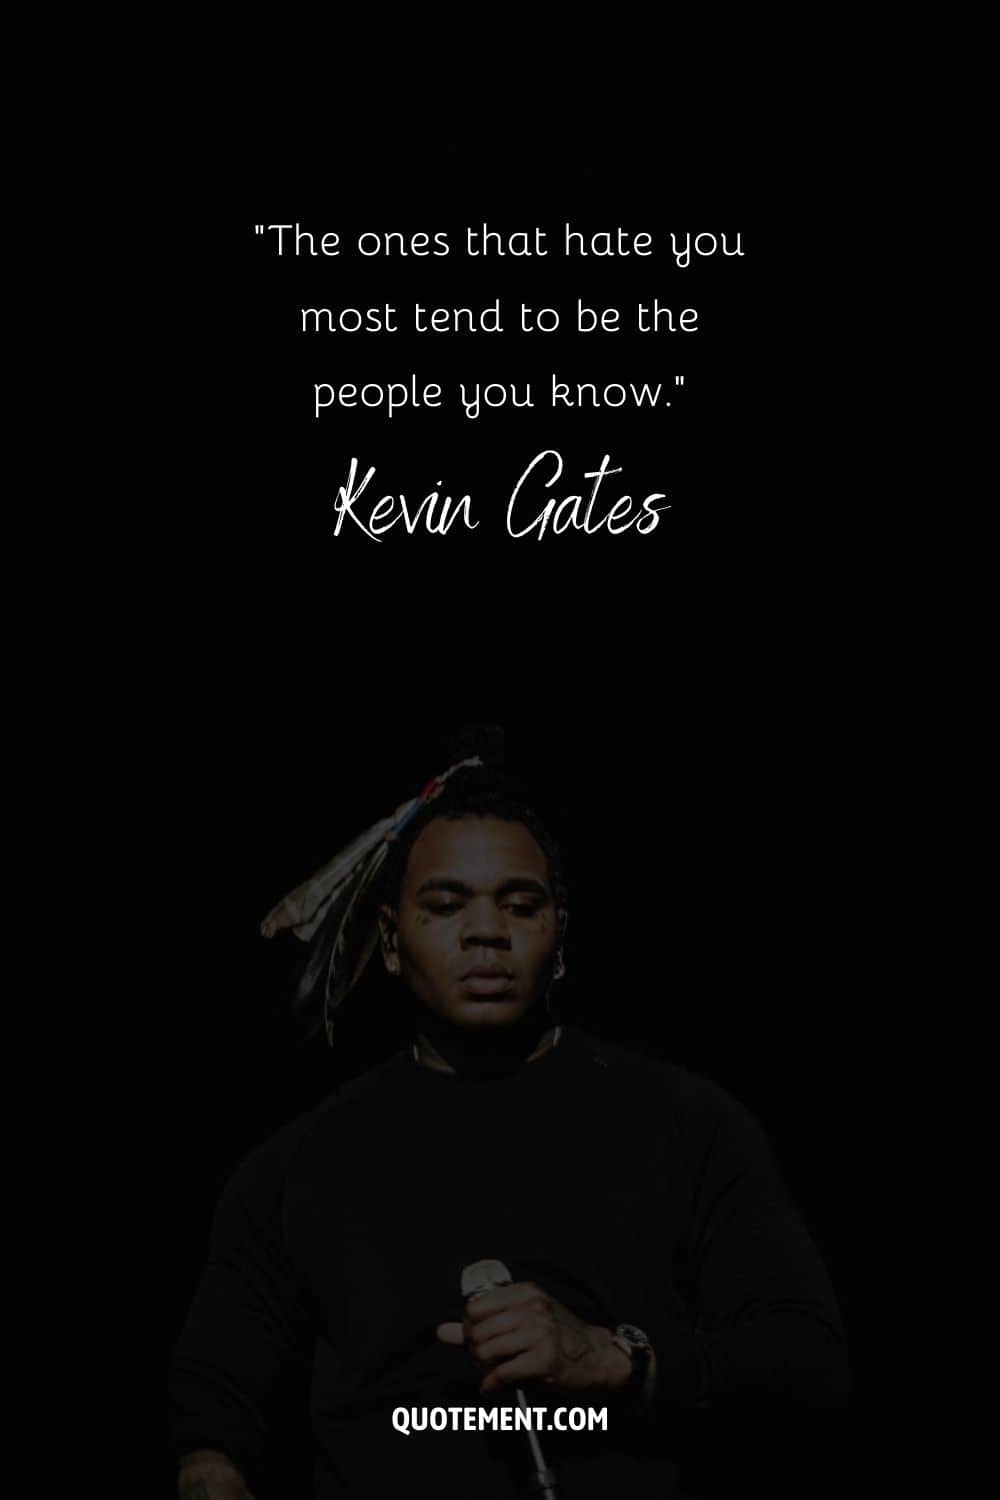 “The ones that hate you most tend to be the people you know.” – Kevin Gates